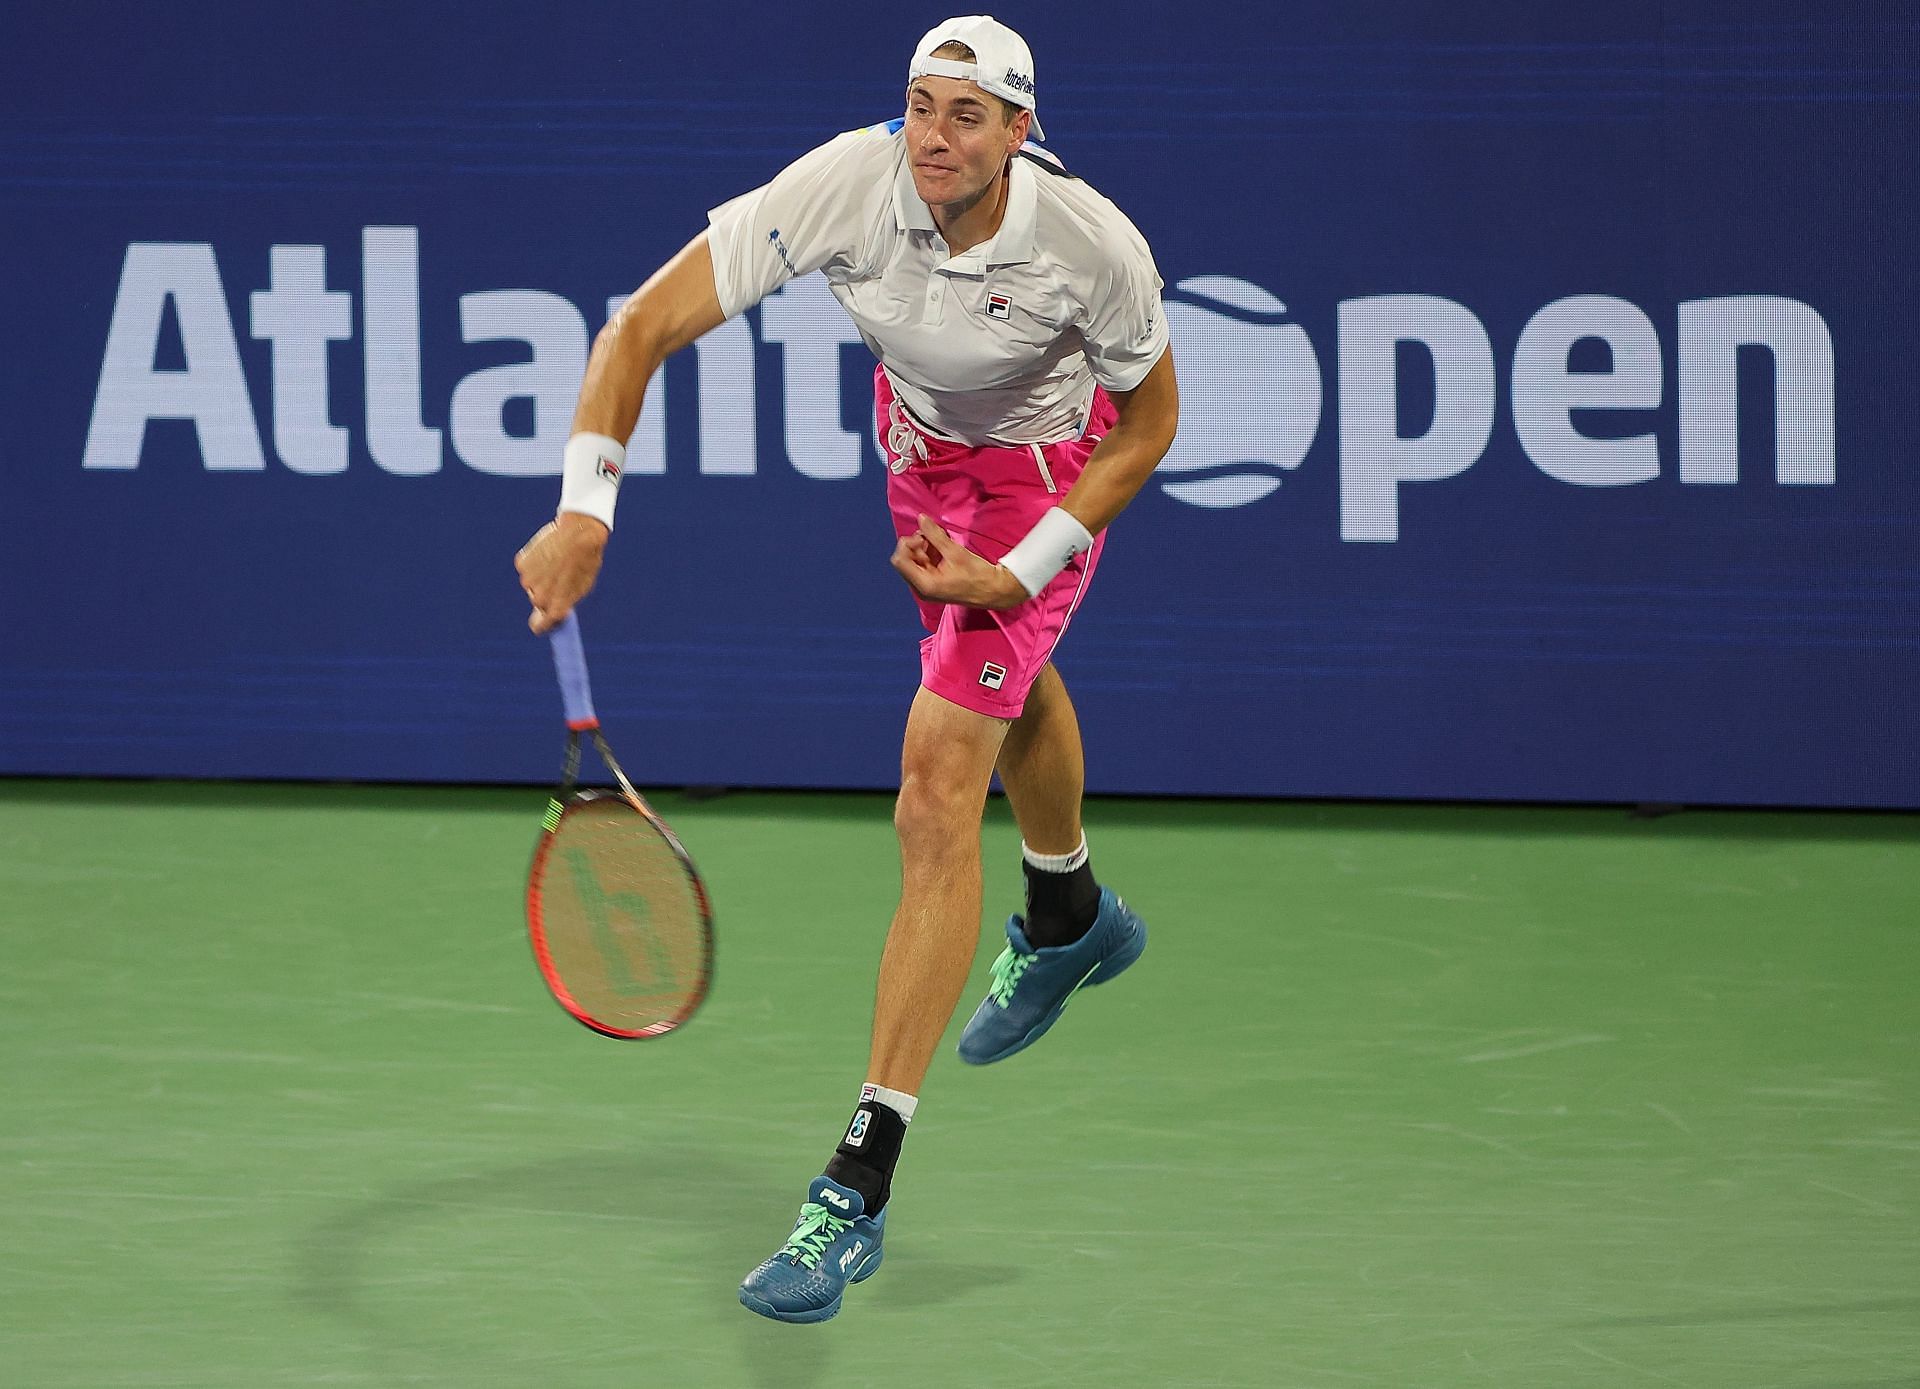 Atlanta Open Results Today: Winners, Scores and as John Isner and Alex de Minaur book their spots in the | Day 4